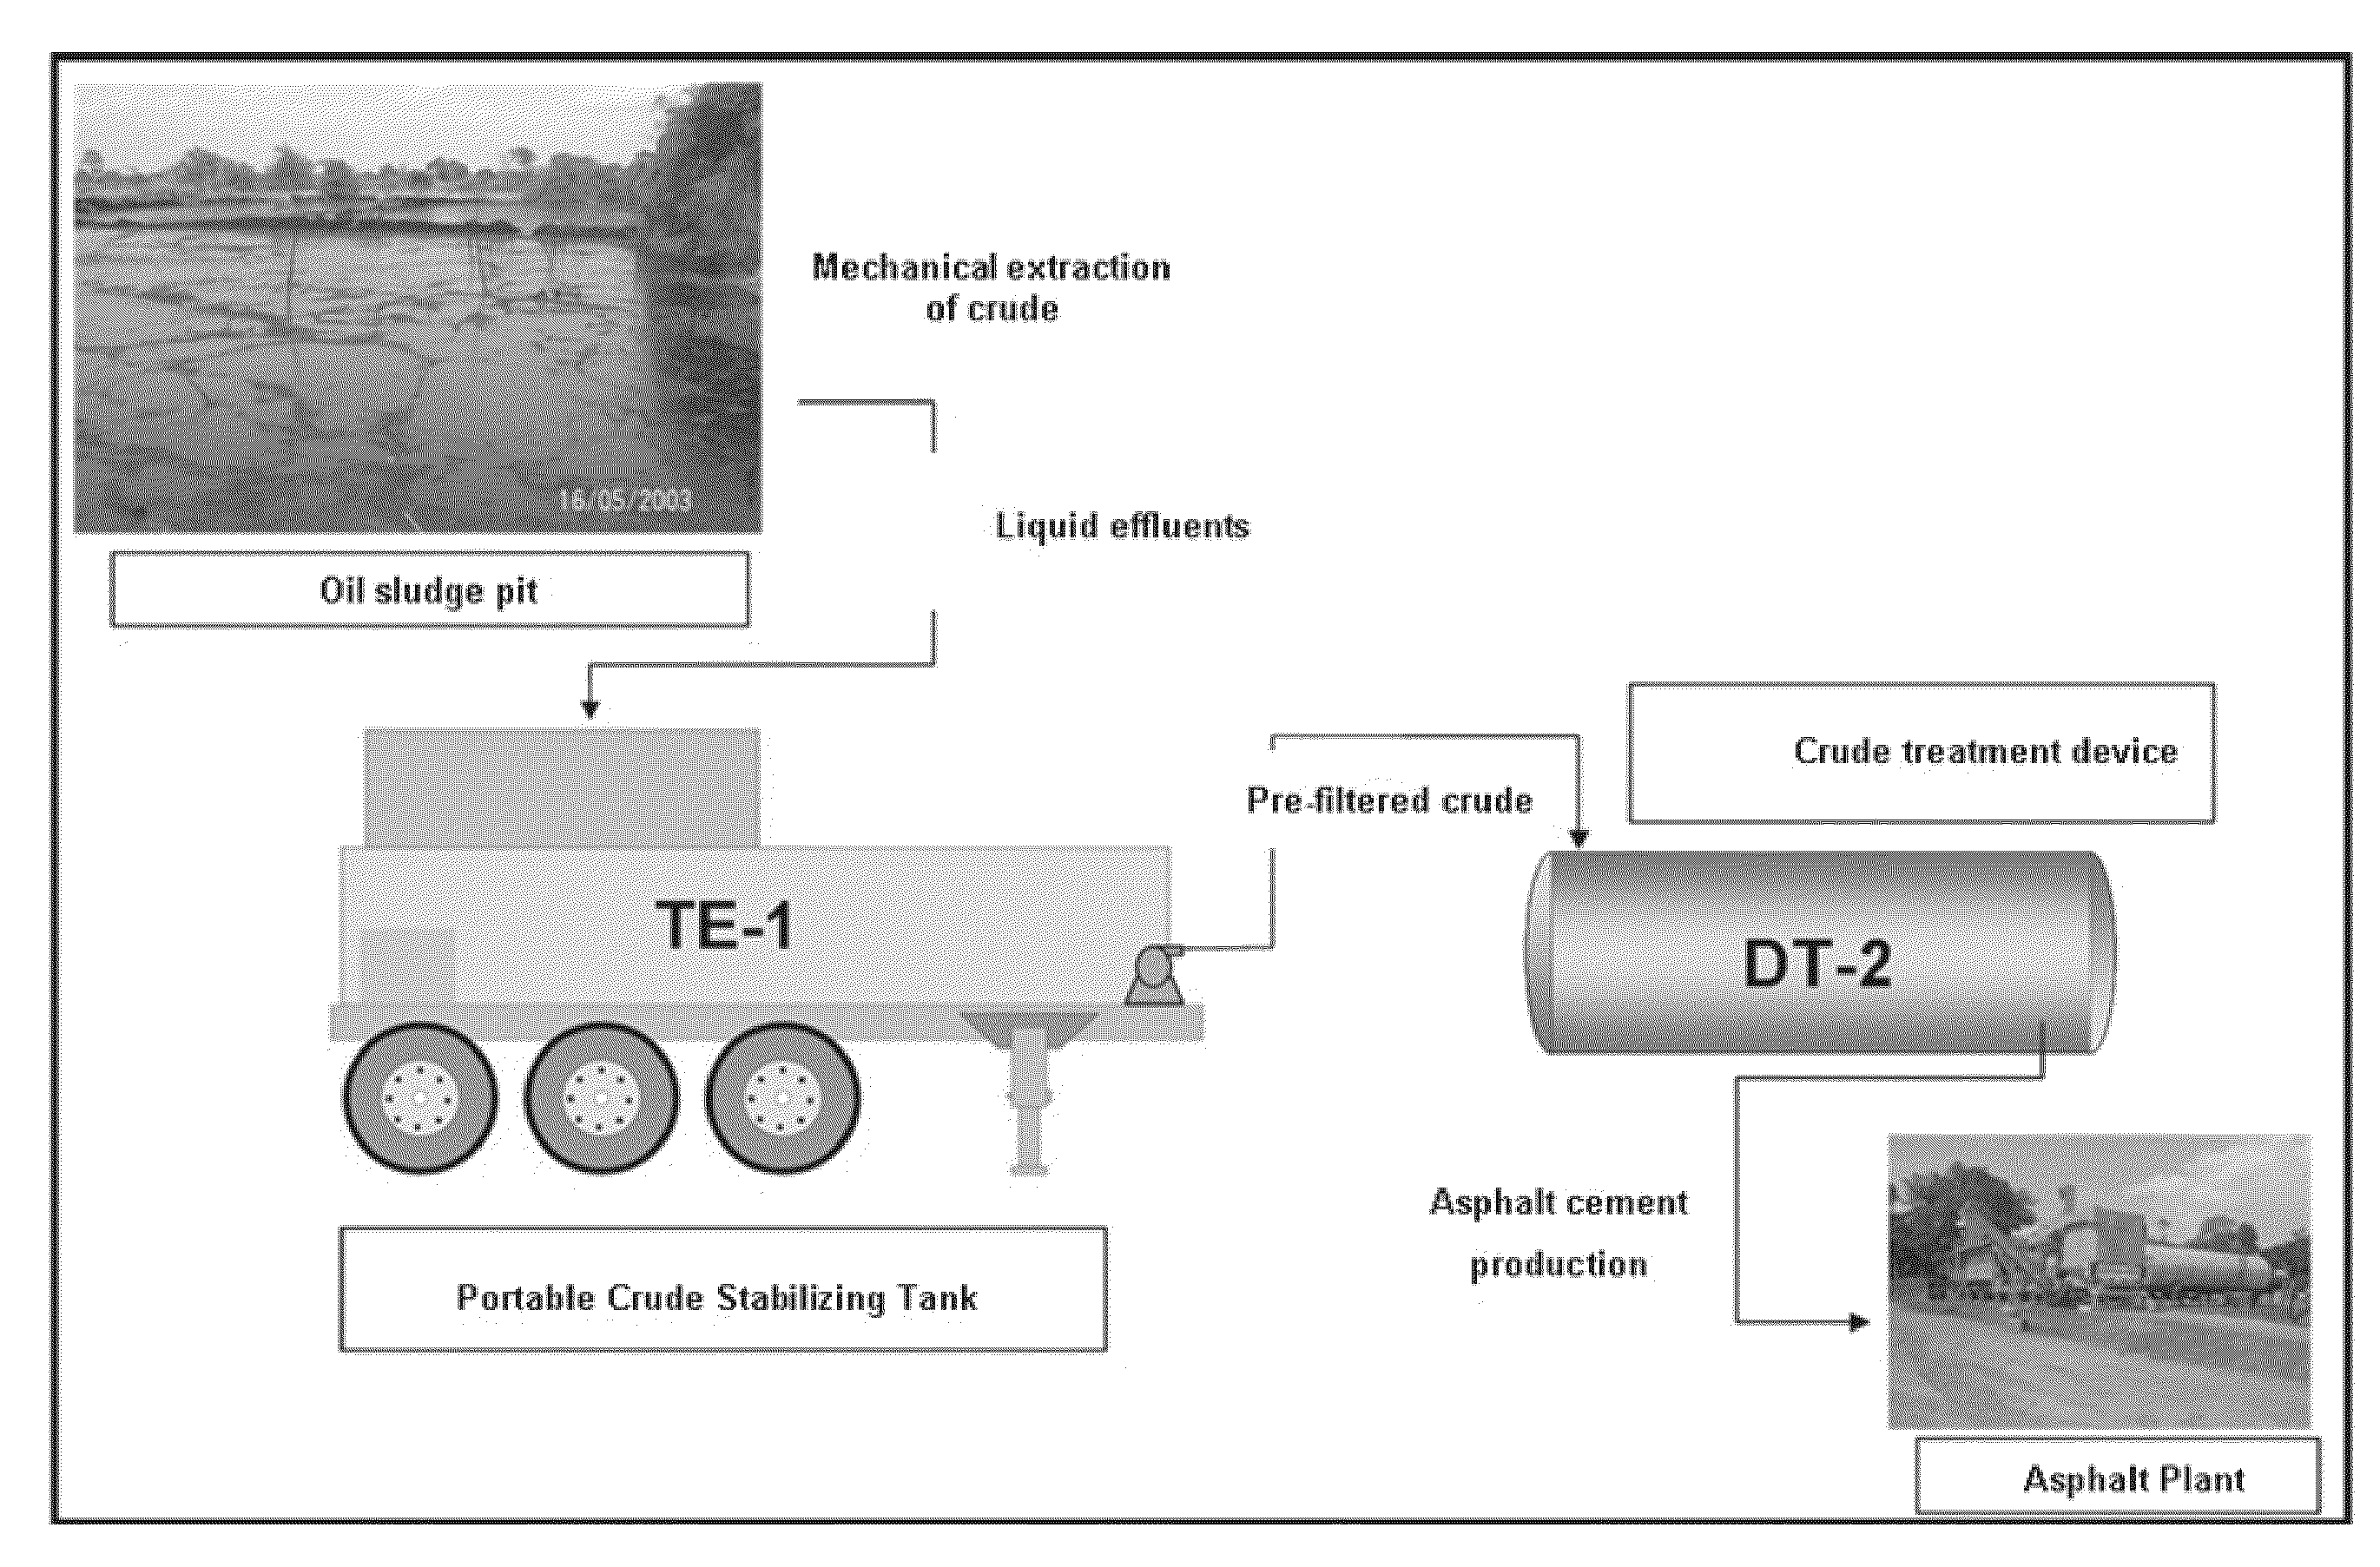 Devices for crude oil treatment and upgrading